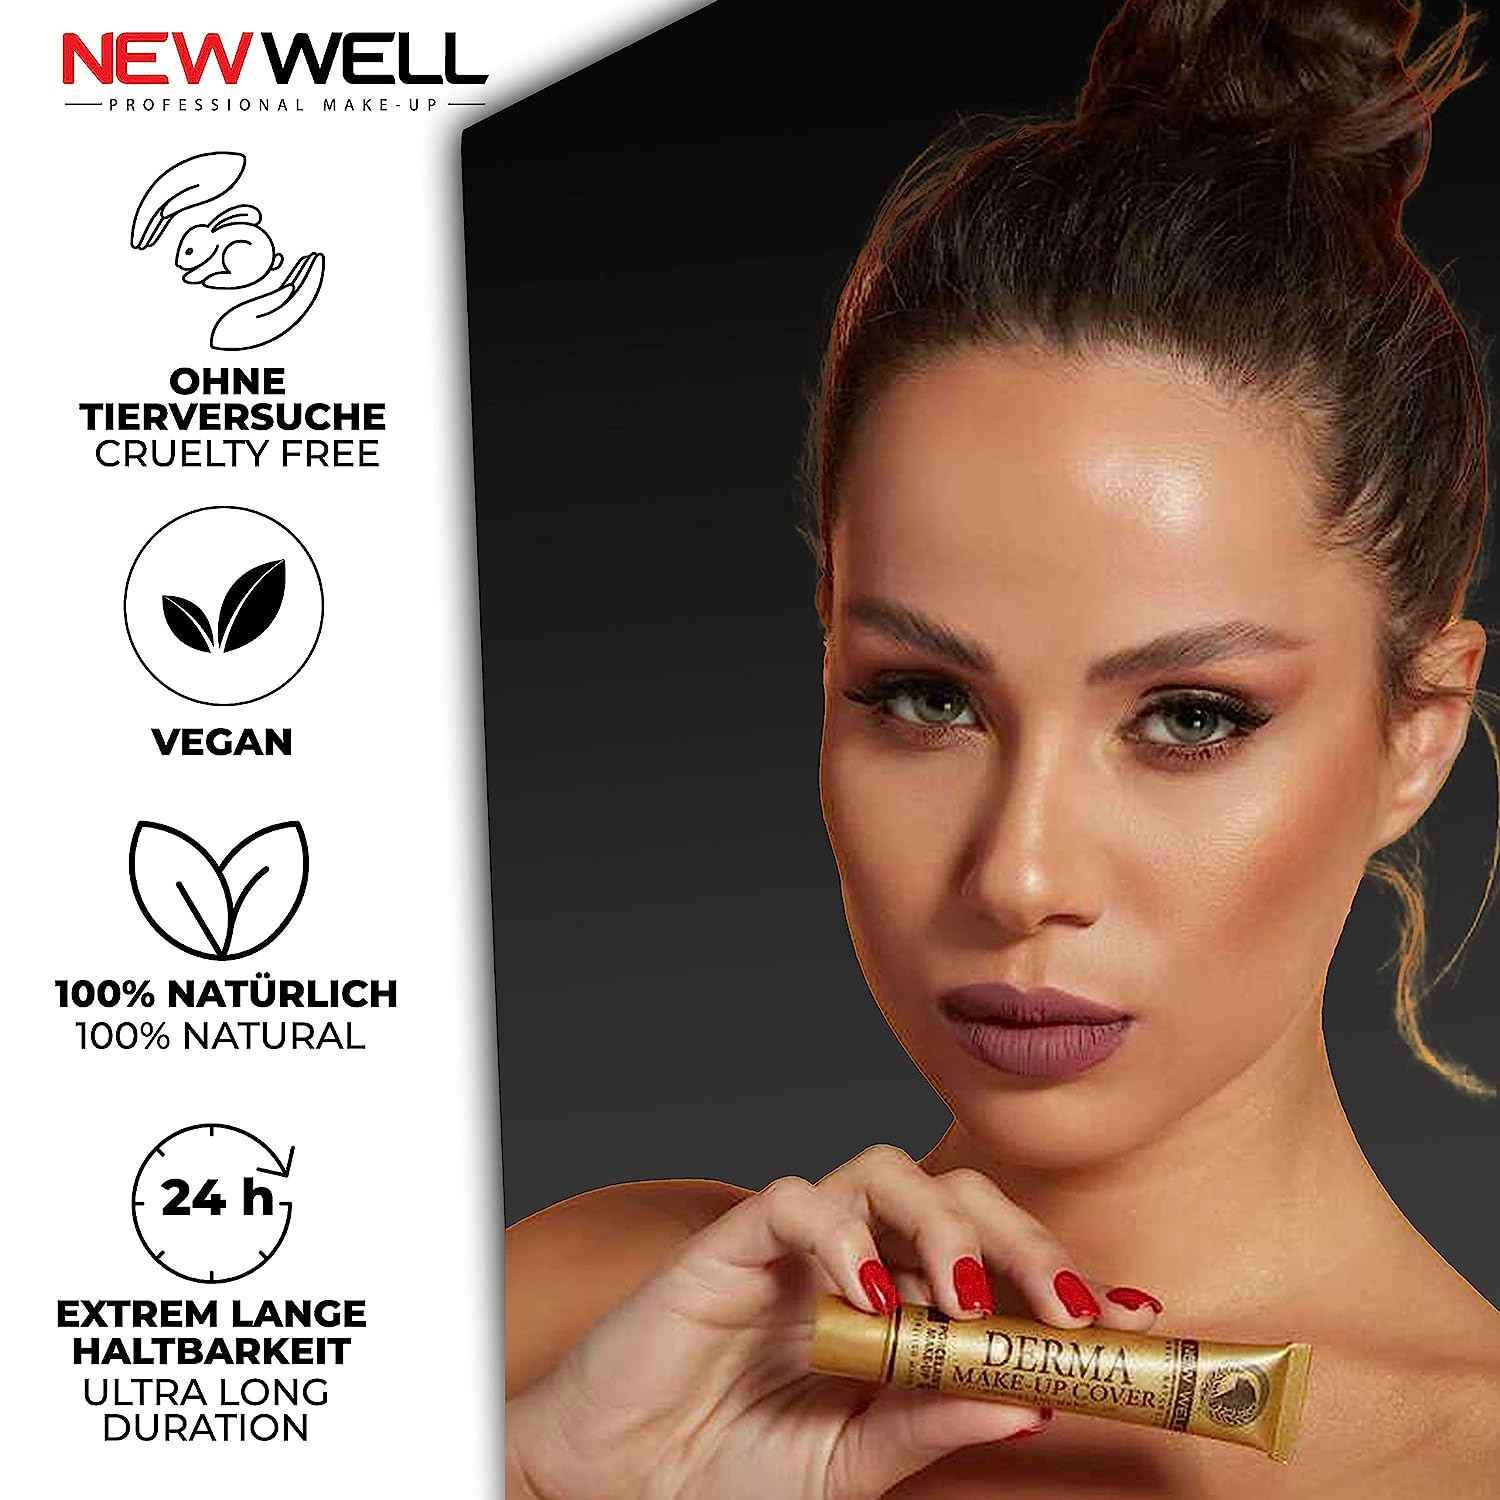 NEWWELL Derma Make-Up Full Cover – Foundation with porcelain effect